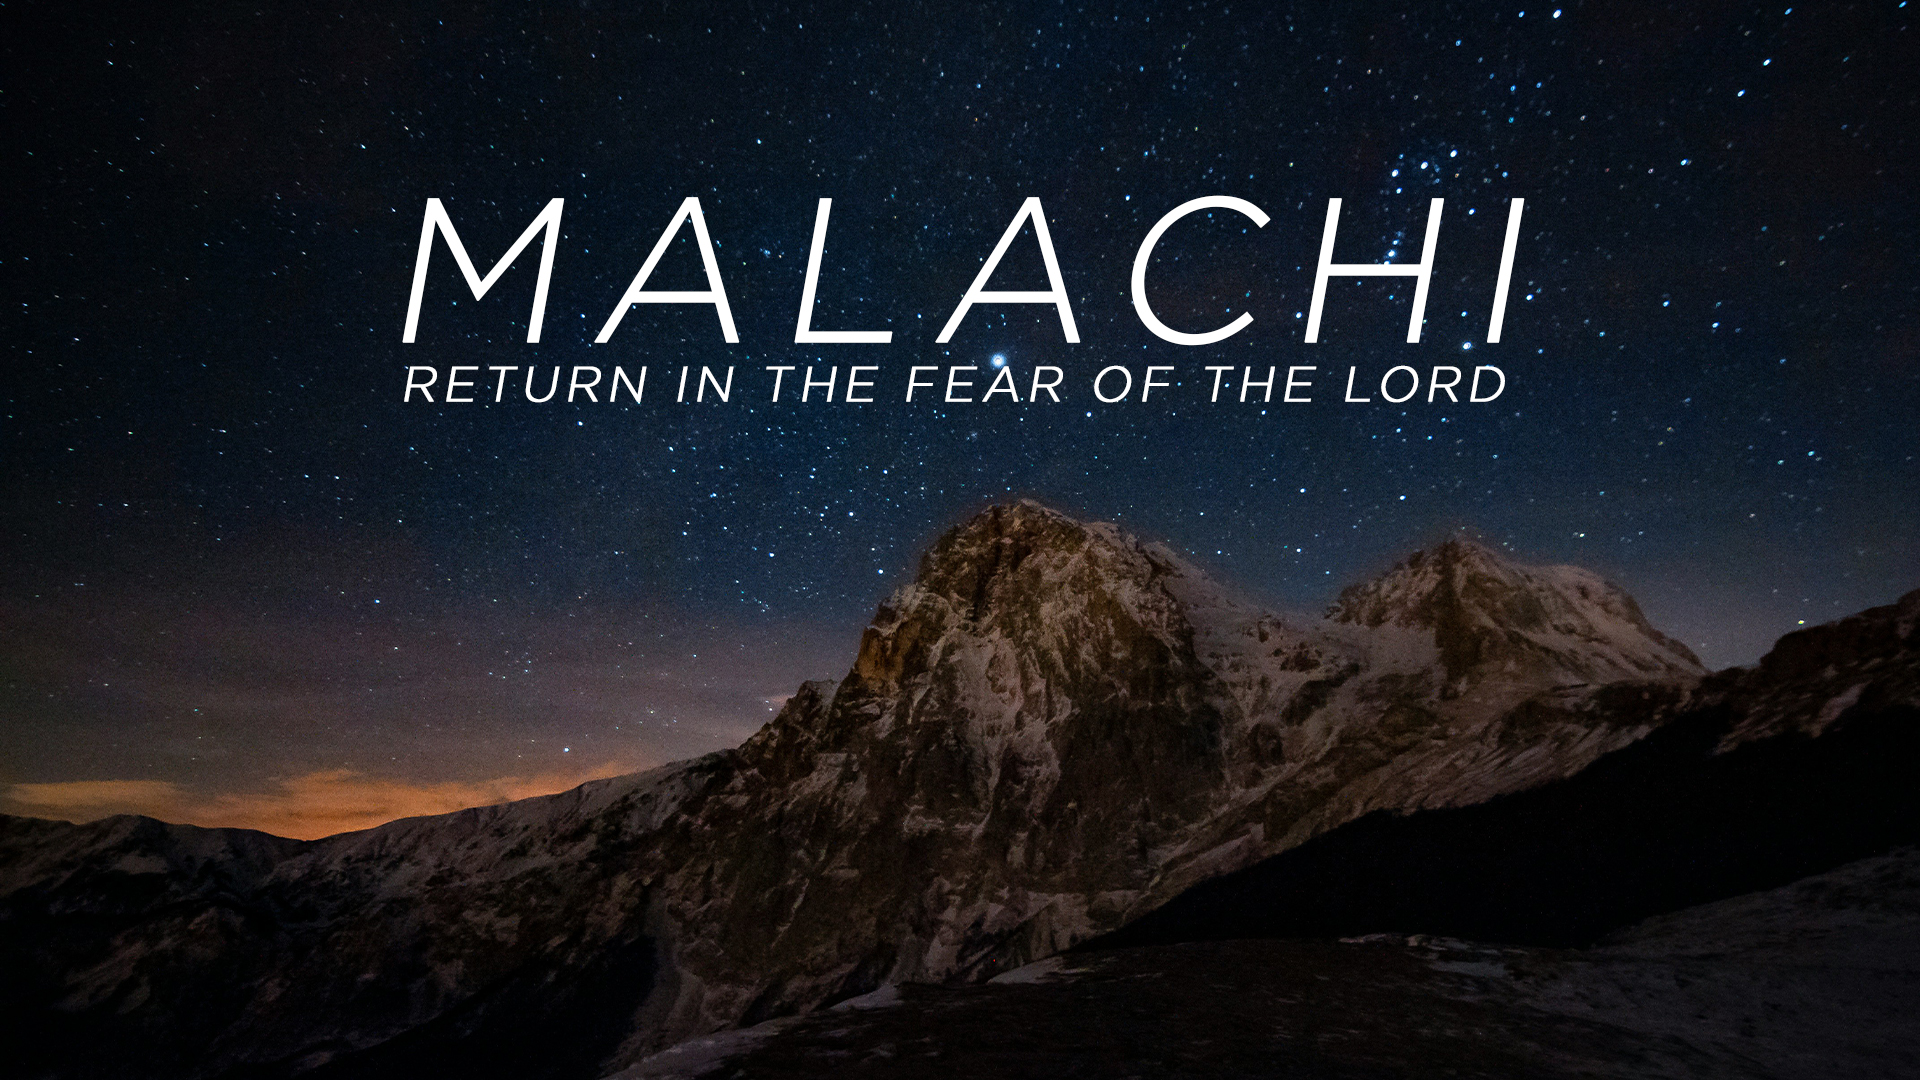 Series: Malachi: Return in the fear of the Lord